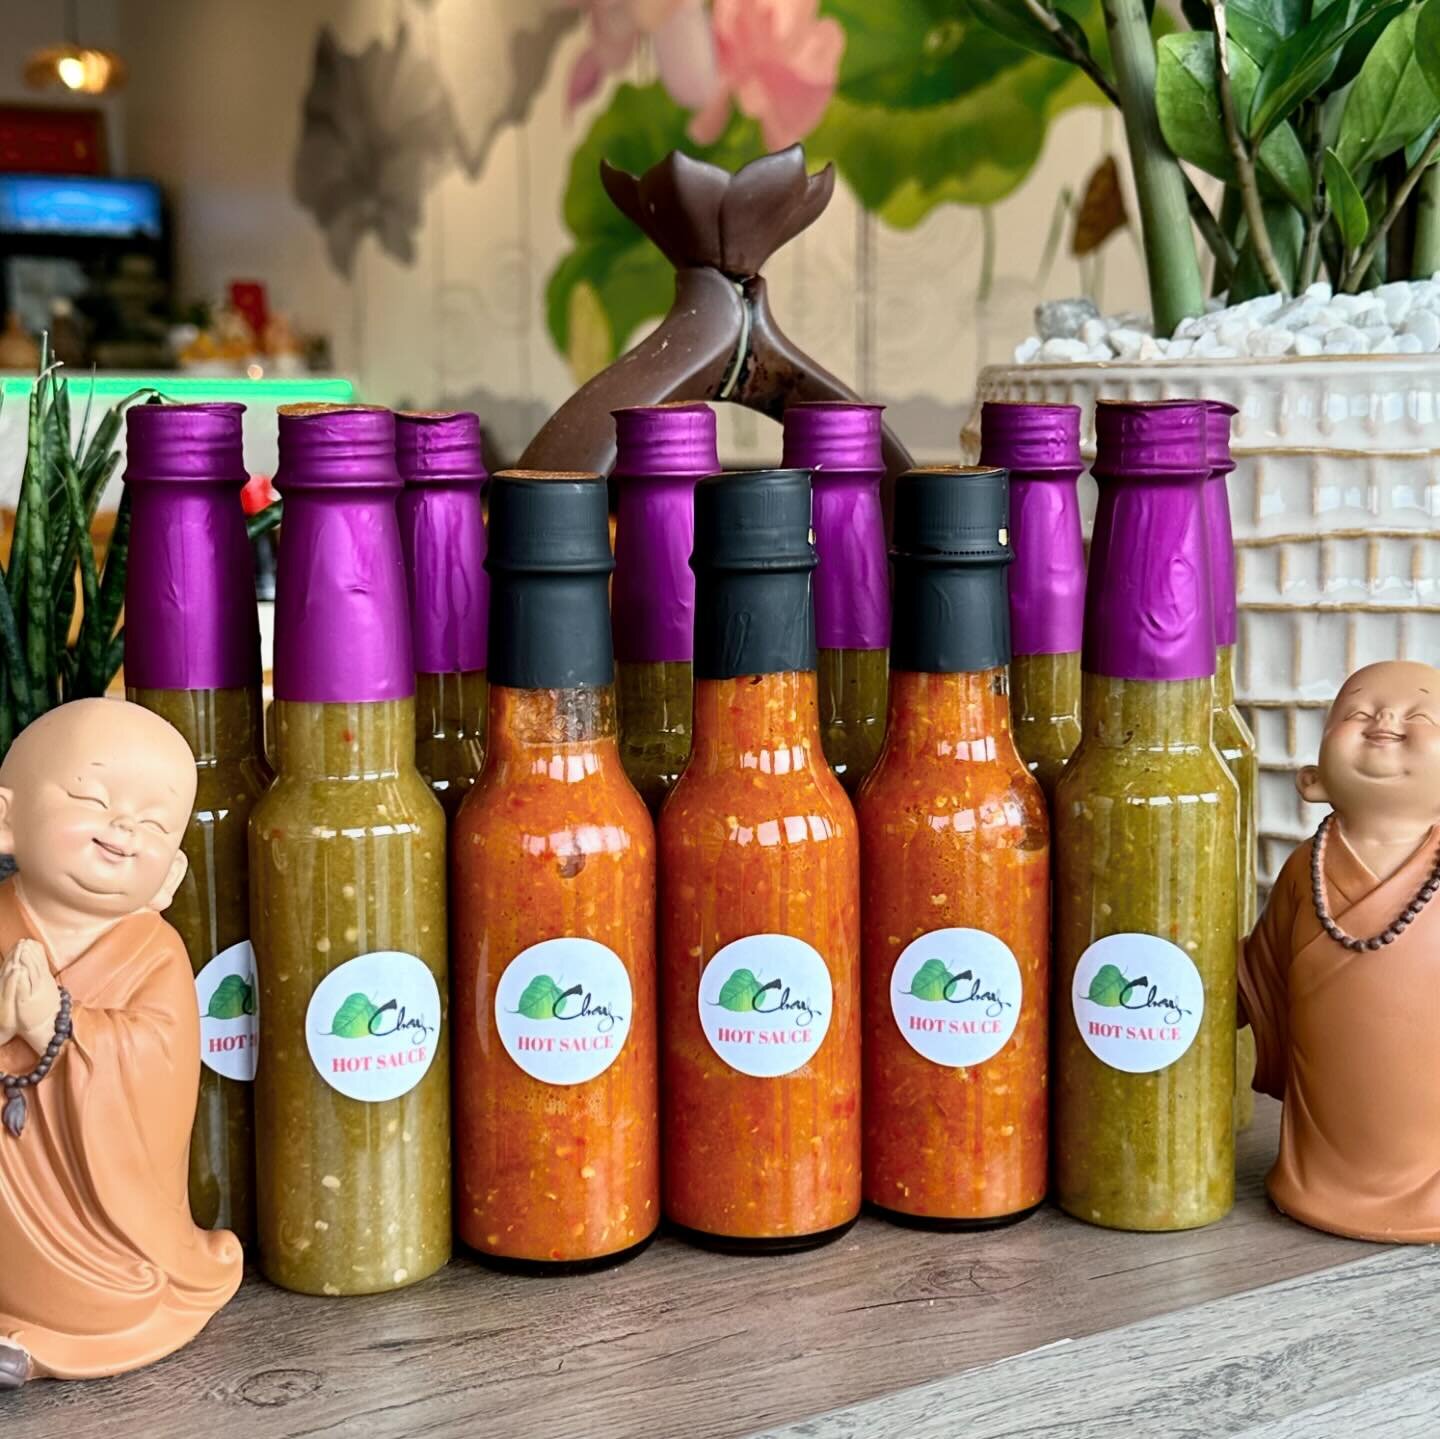 Breaking News! 
We are excited to announce that our much-loved house-made hot sauce is now available for purchase! 

Made with a blend of Thai chilis, Ghost peppers, and California Reaper peppers, this fiery creation will ignite your taste buds with 